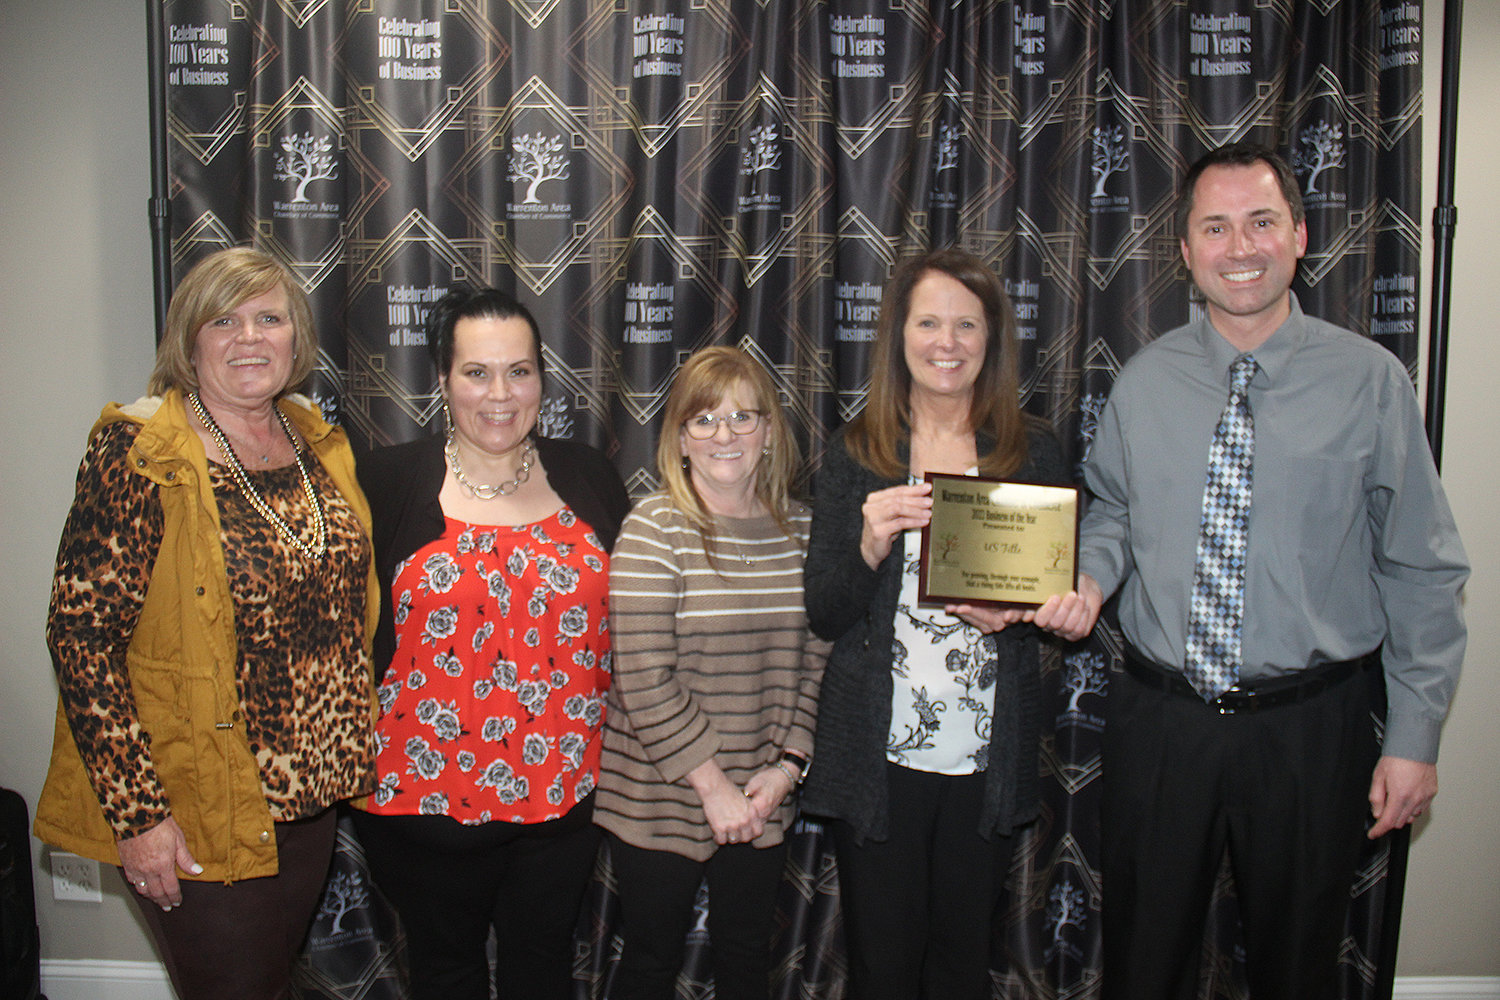 BUSINESS OF THE YEAR — Recorder Christy Bonstell and Mindy Kimler, Tracy Smith and Jeanette Hooton of U.S. Title accept the business of the year award from board member Dan Dieckmann.